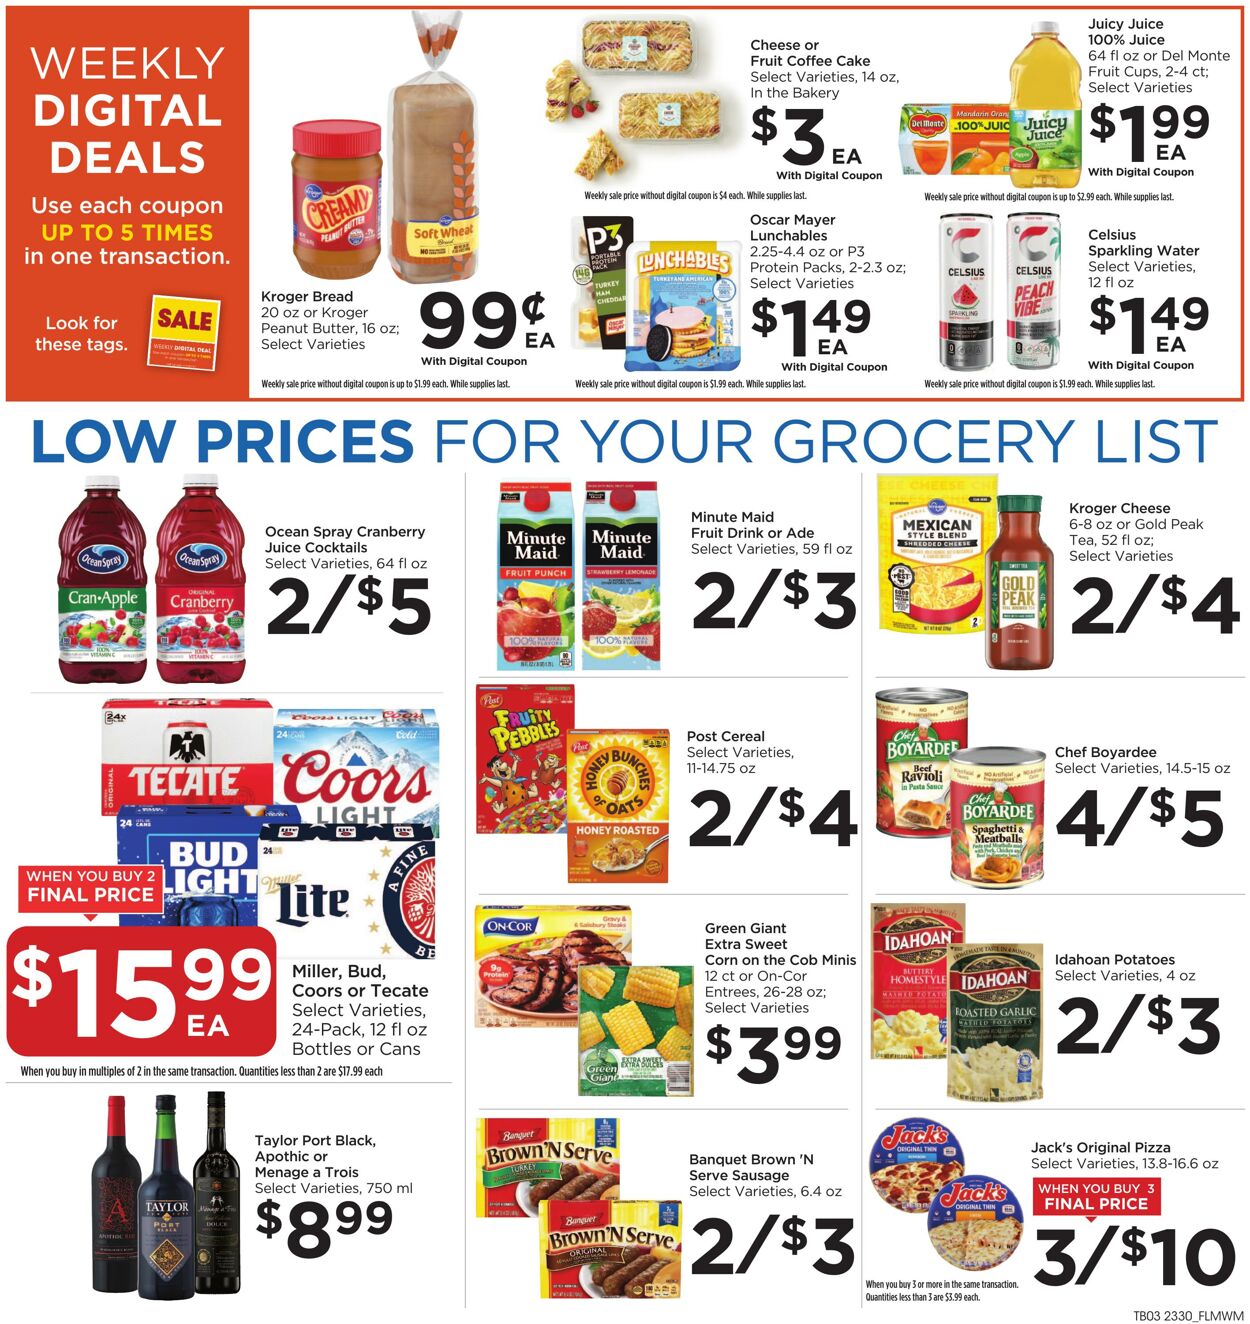 Catalogue Food 4 Less from 08/23/2023